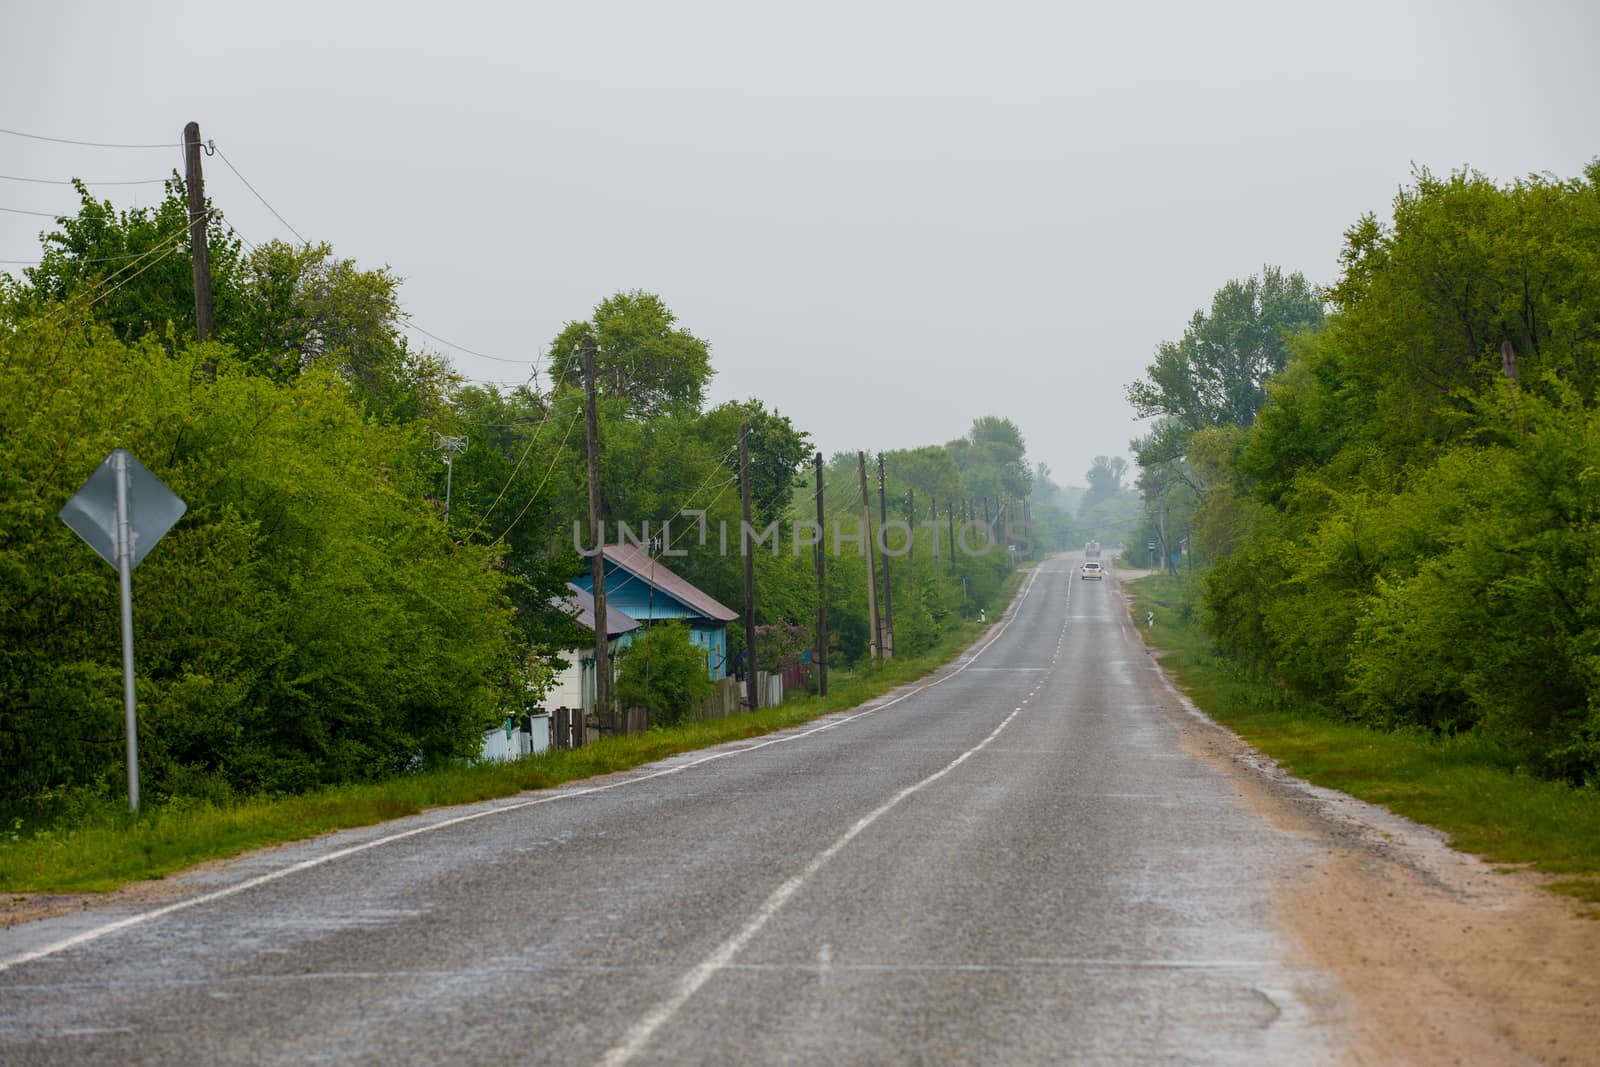 An asphalt road passes by a village with wooden houses by PrimDiscovery